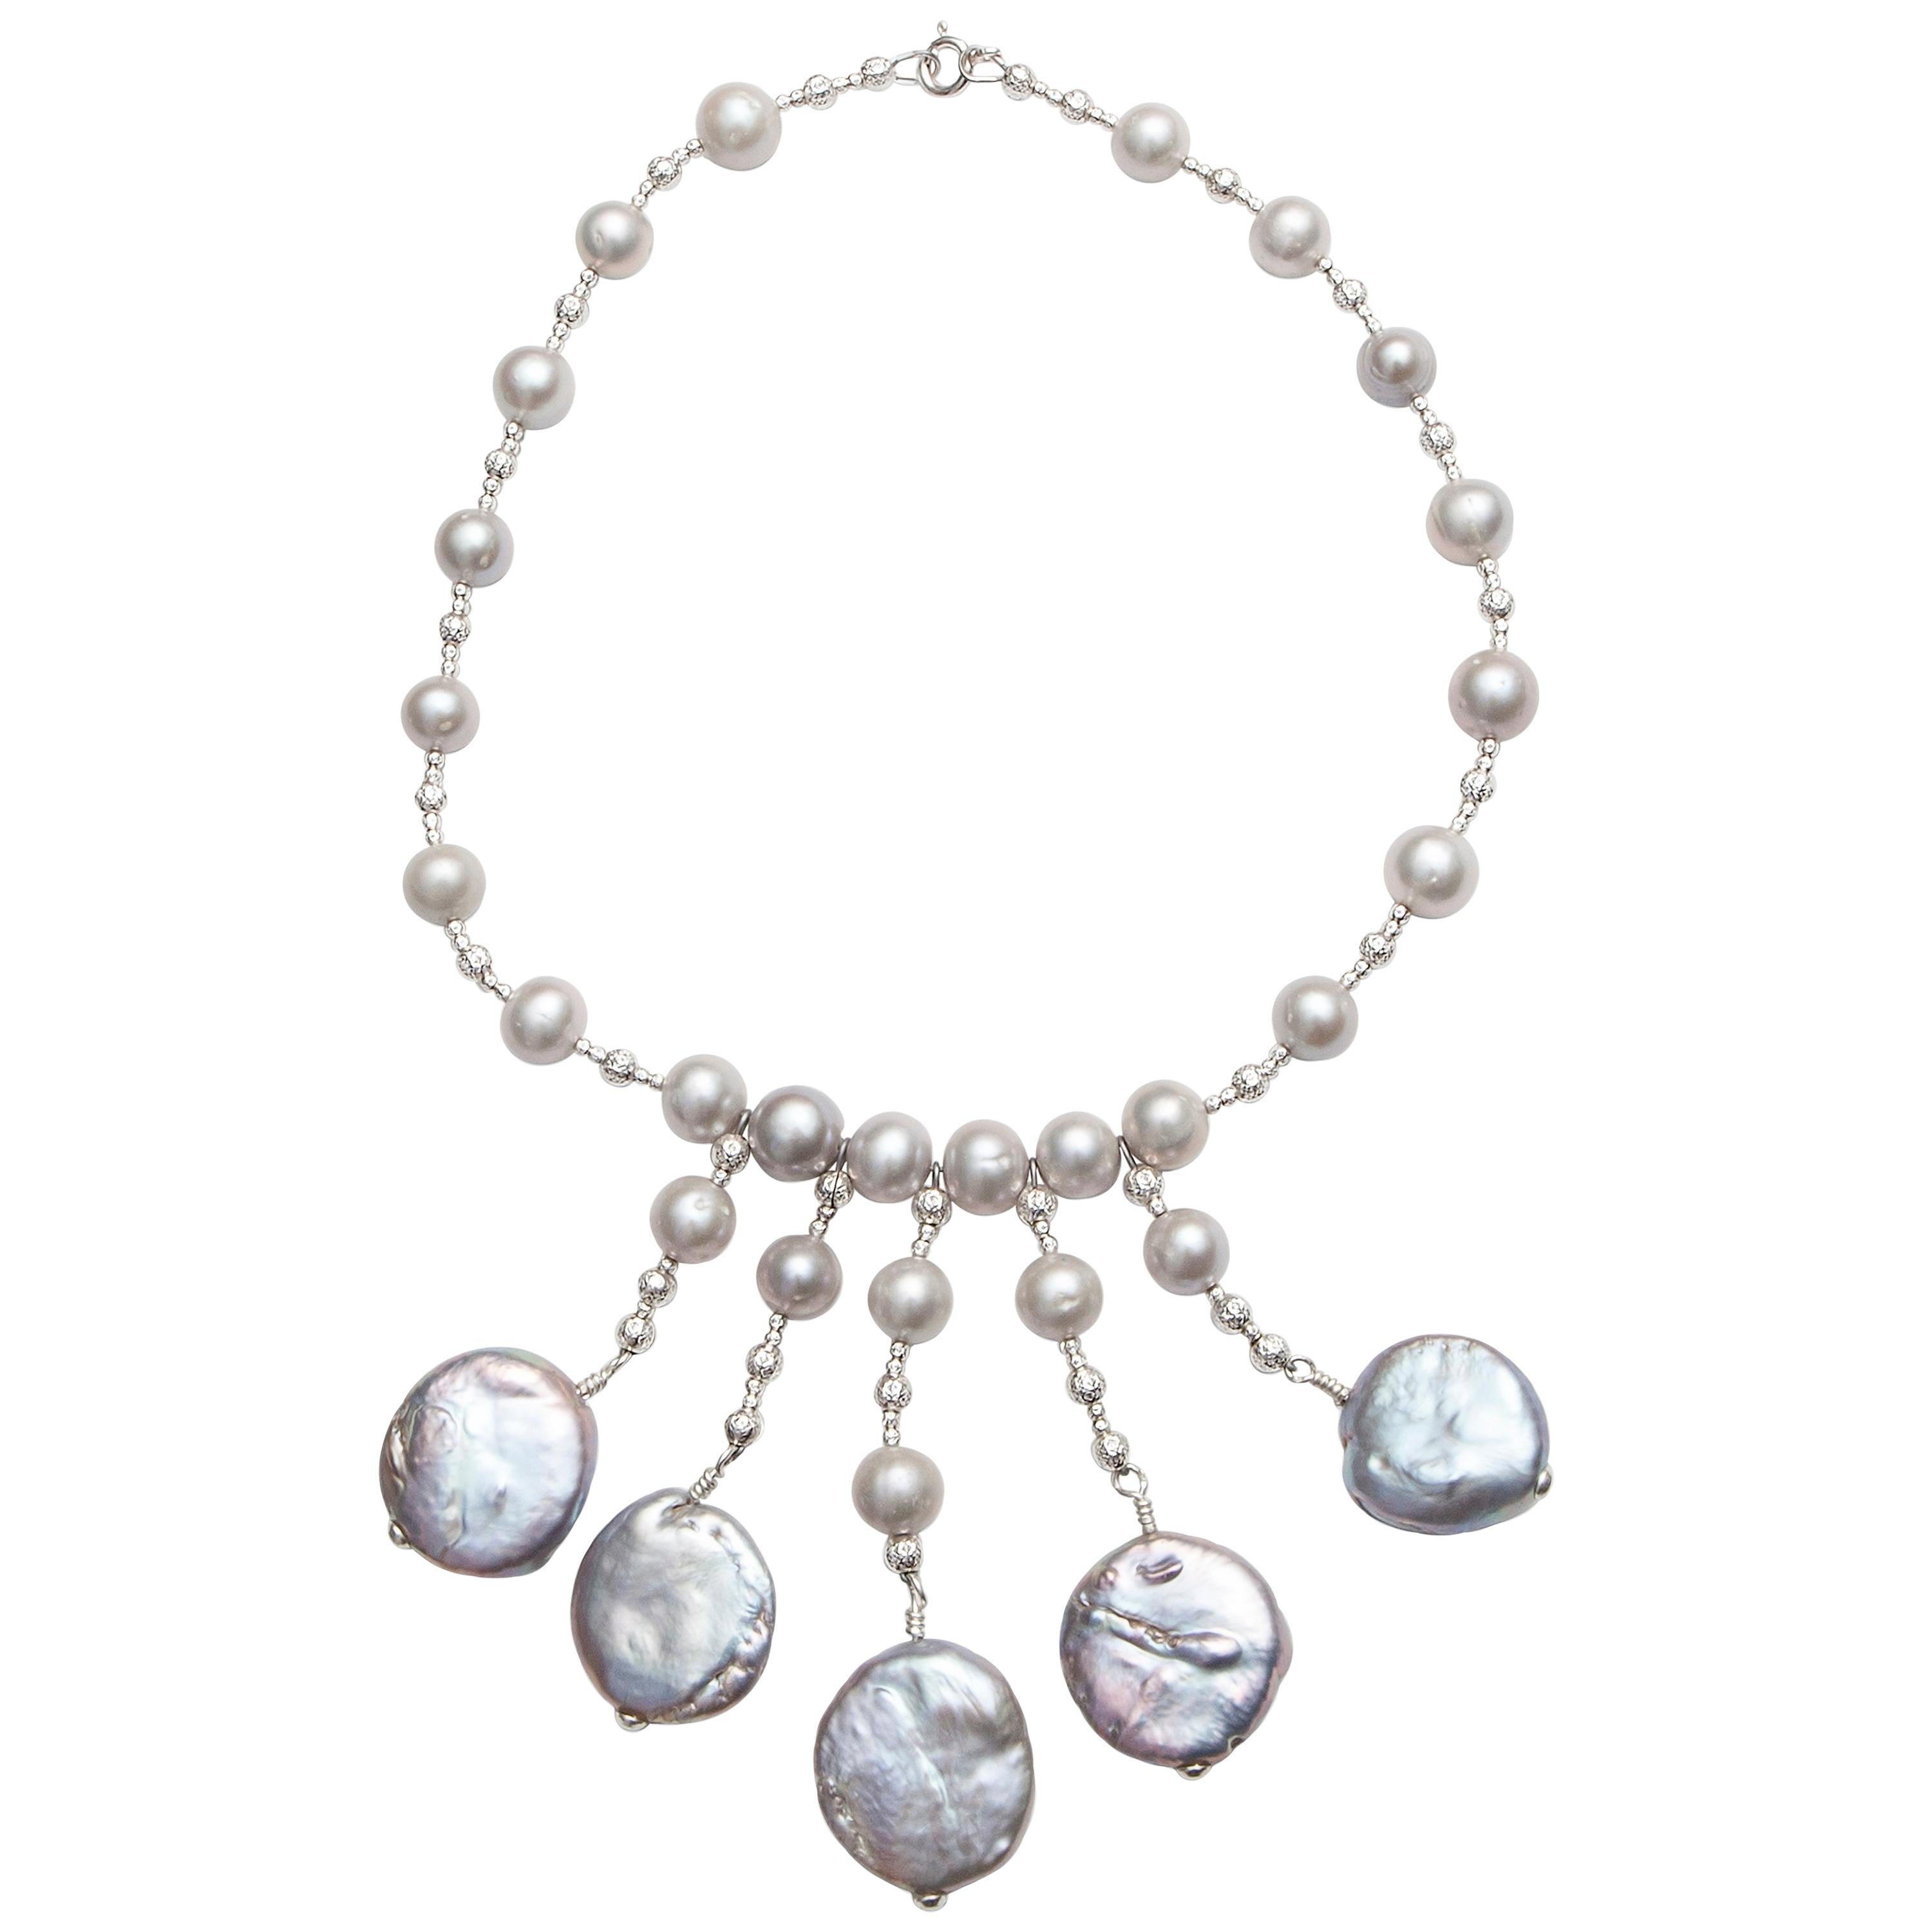 Grey Pearl Necklace with Five-Coin Pearl Drops and Diamond Cut Silver Beads For Sale